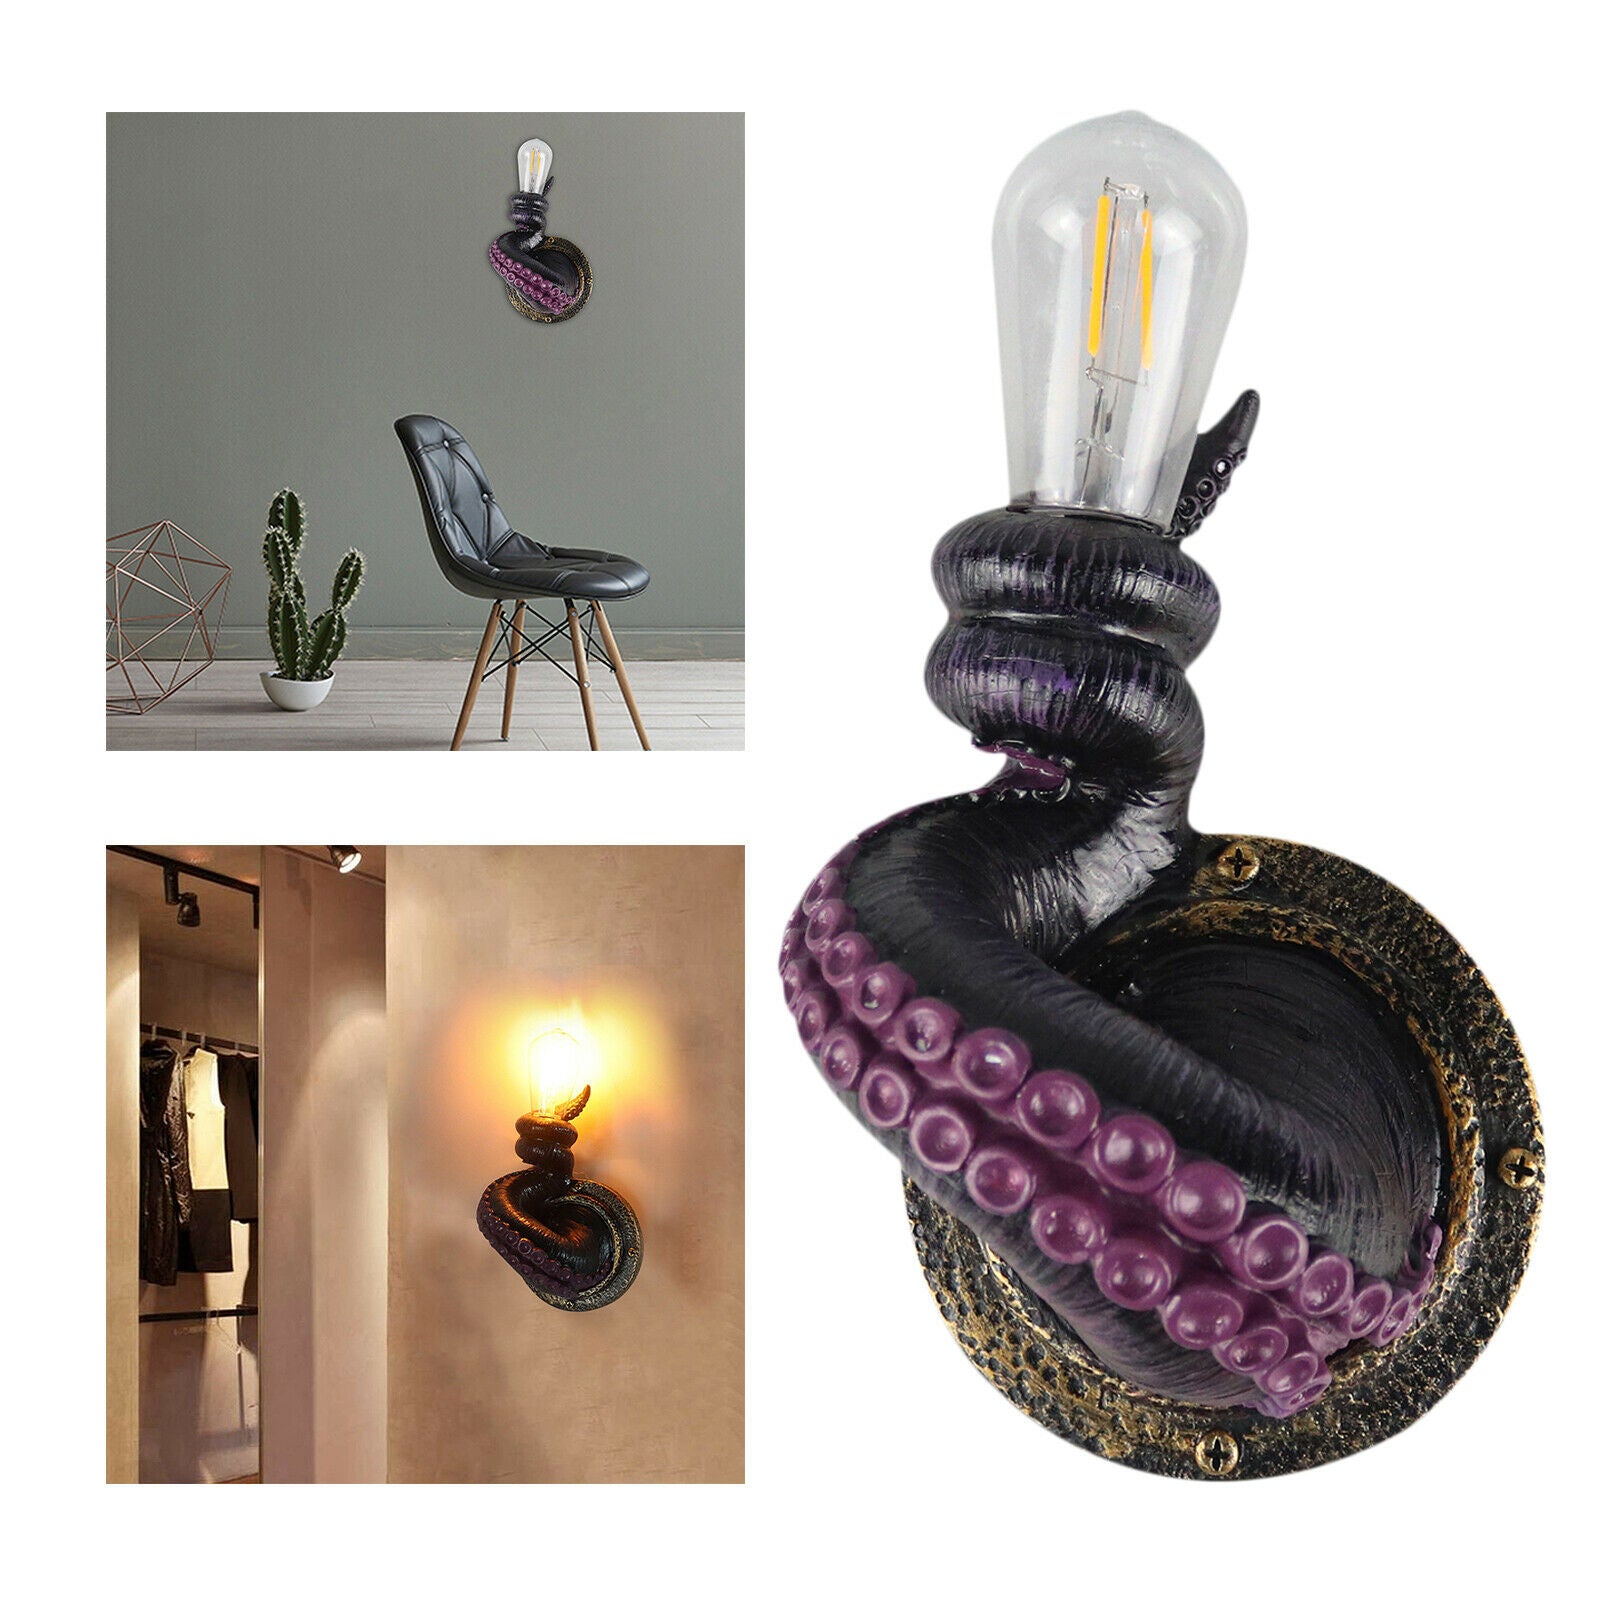 Monster Tentacle Wall Lamp Electric Wall Light Decoration for Yard Decor